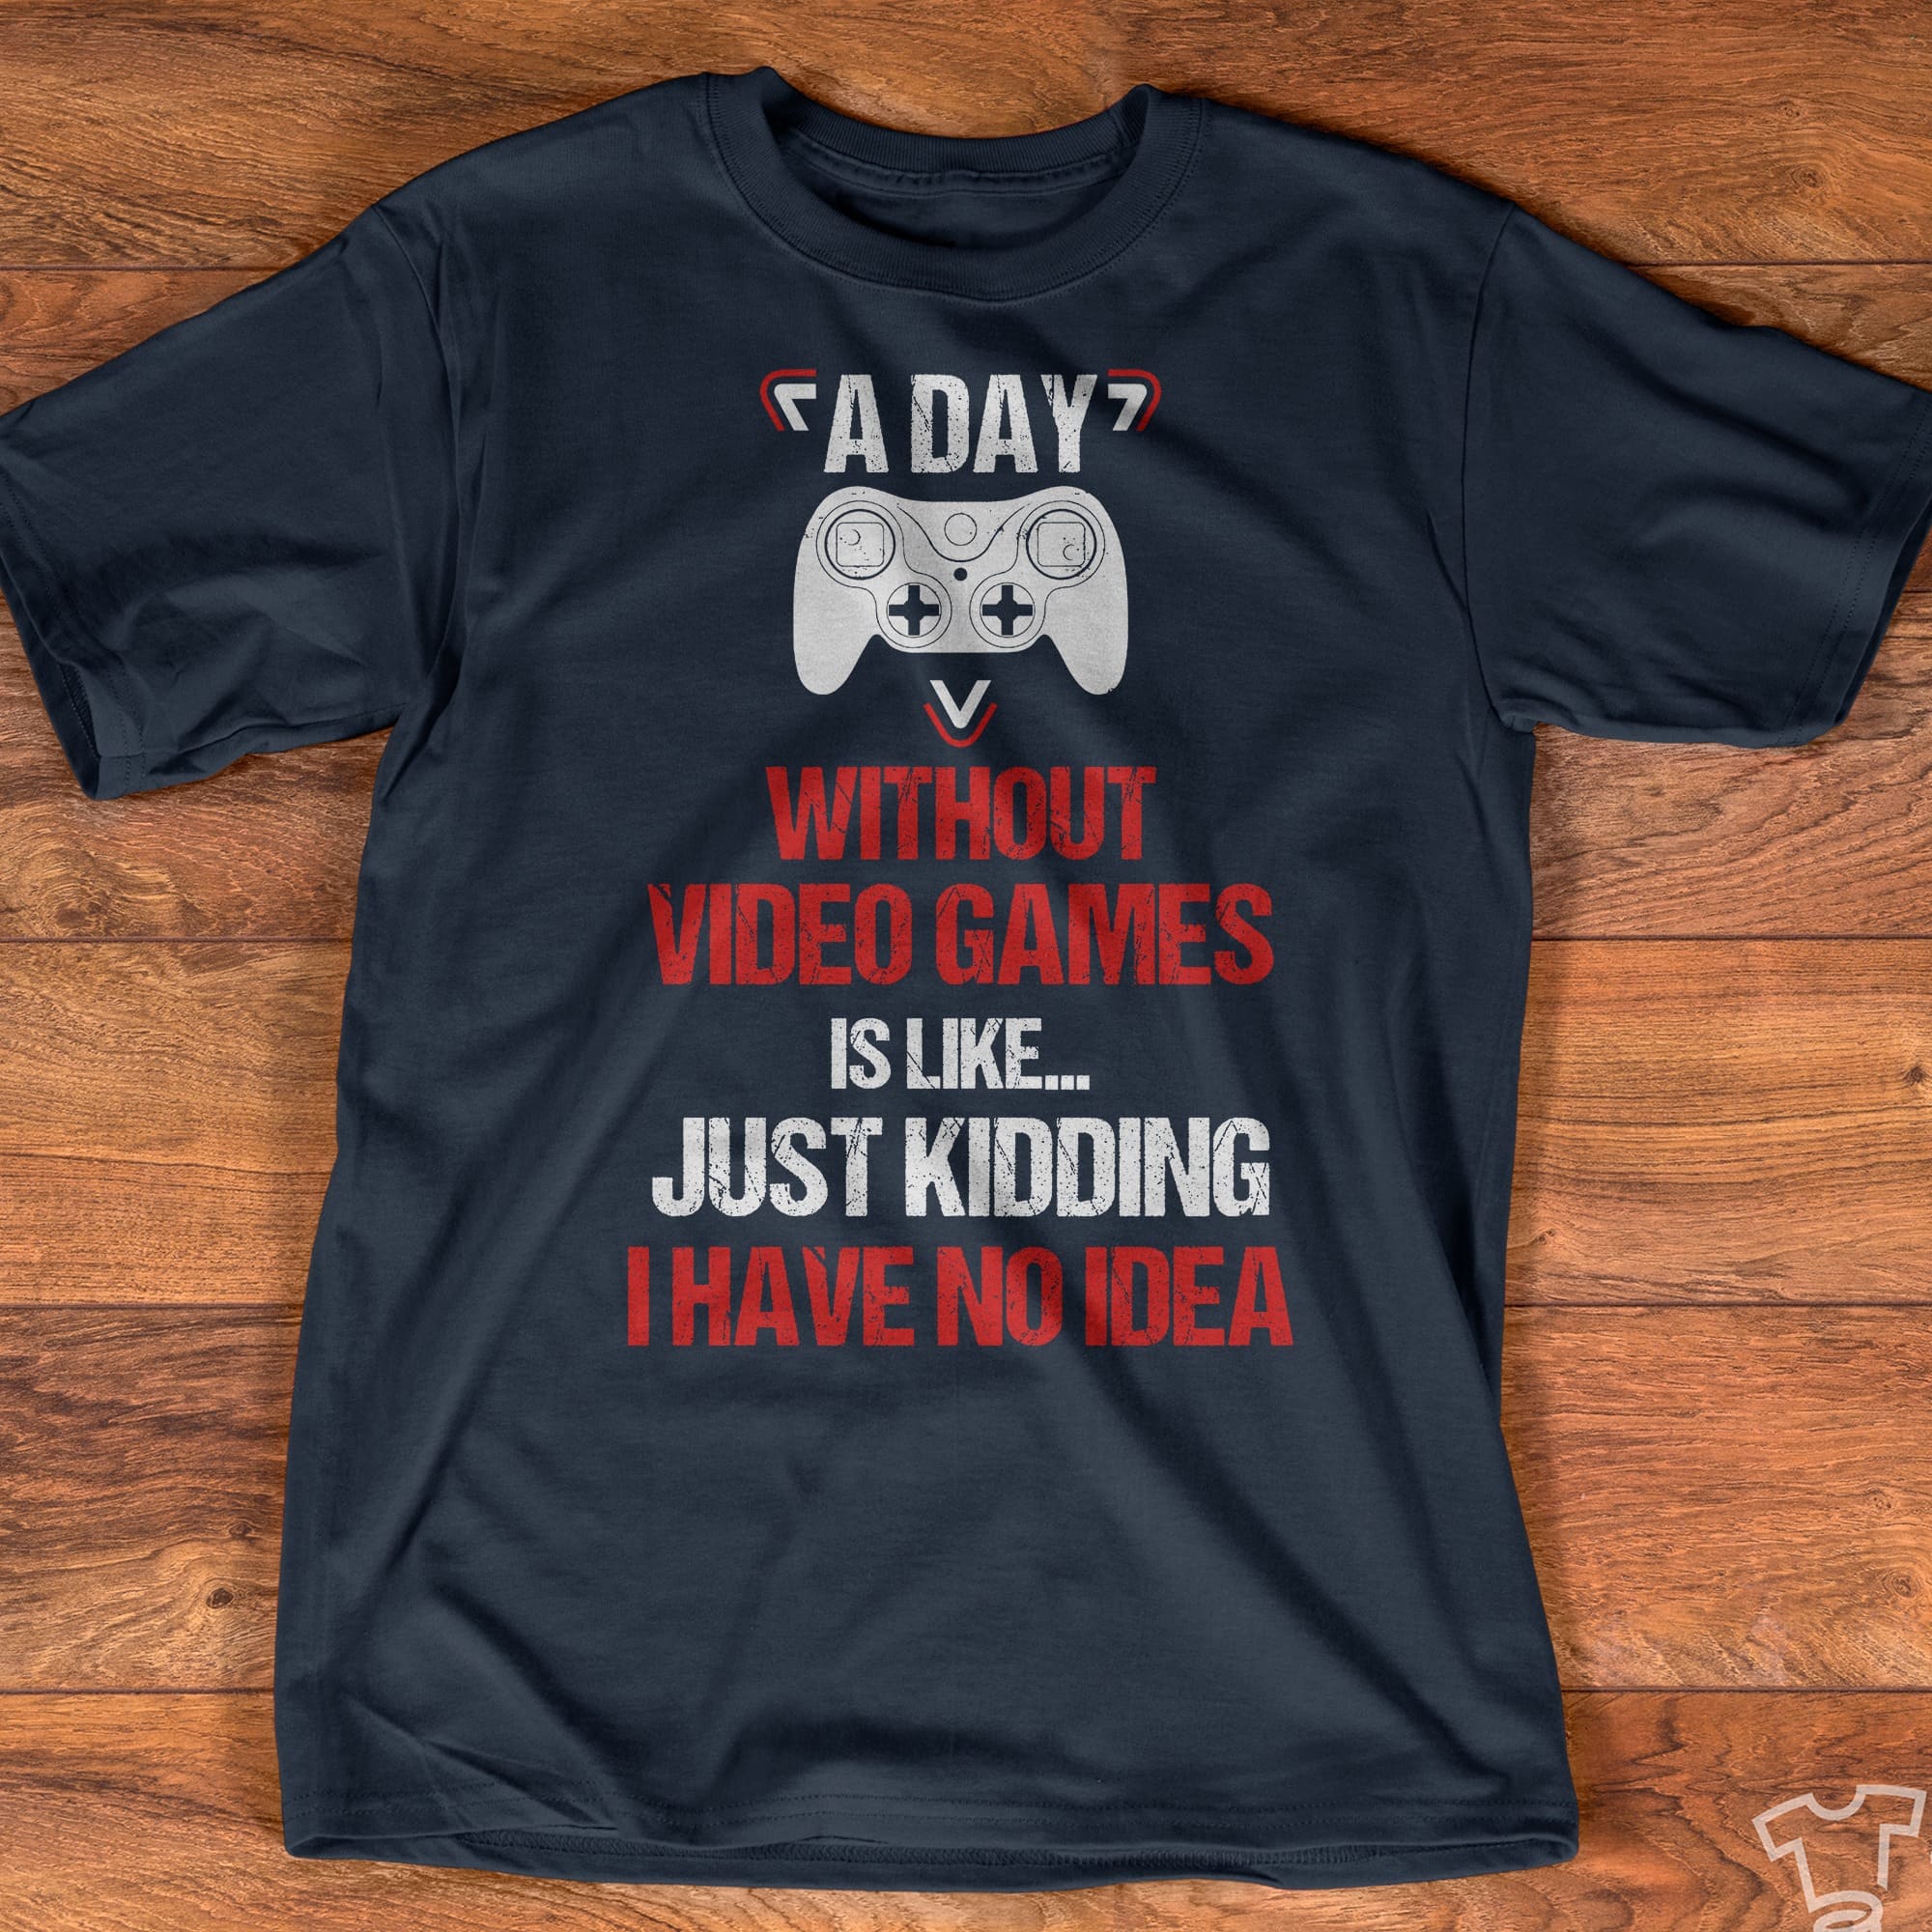 Game Console - A day without video games is like just kidding i have no idea